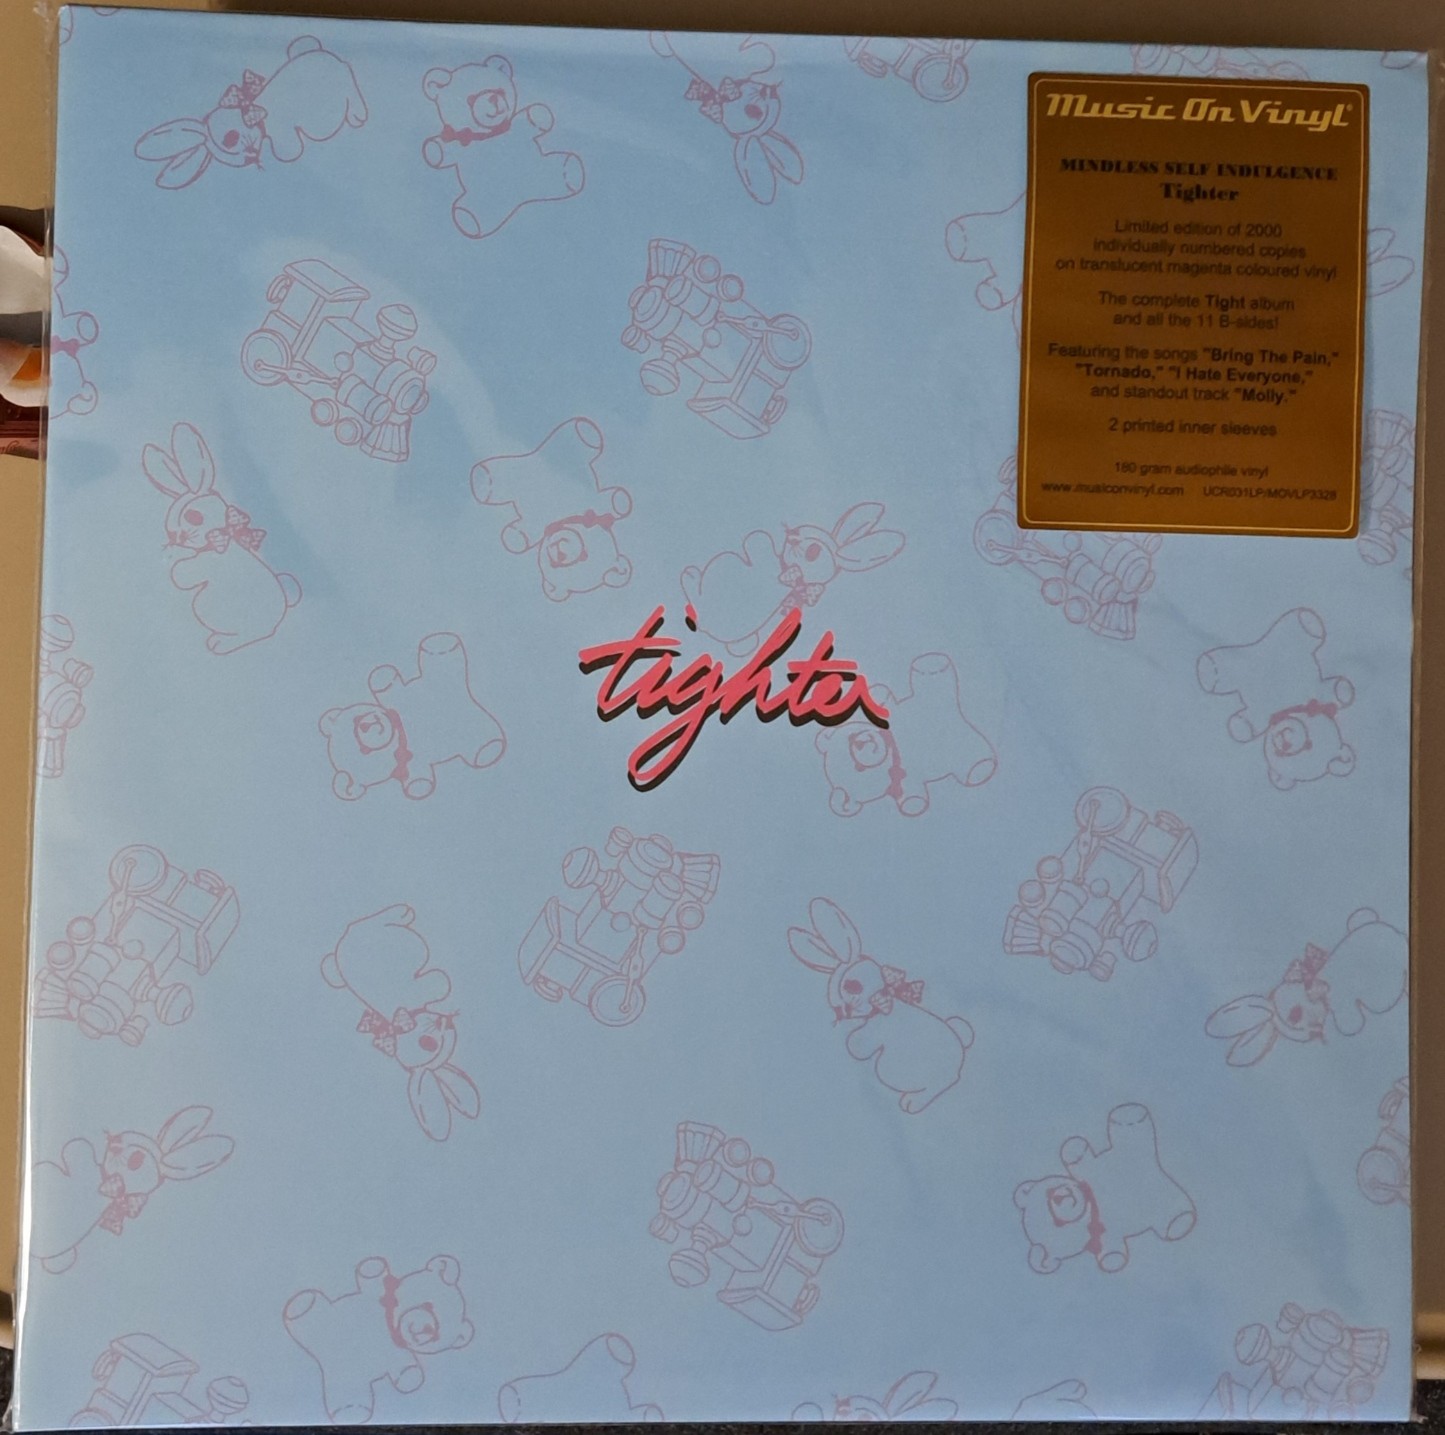 A picture of Mindless Self Indulgence's "Music On Vinyl" edition of "tighter", the ultimate edition of the '99 album "tight" and all ita B-sided in a 2LP.